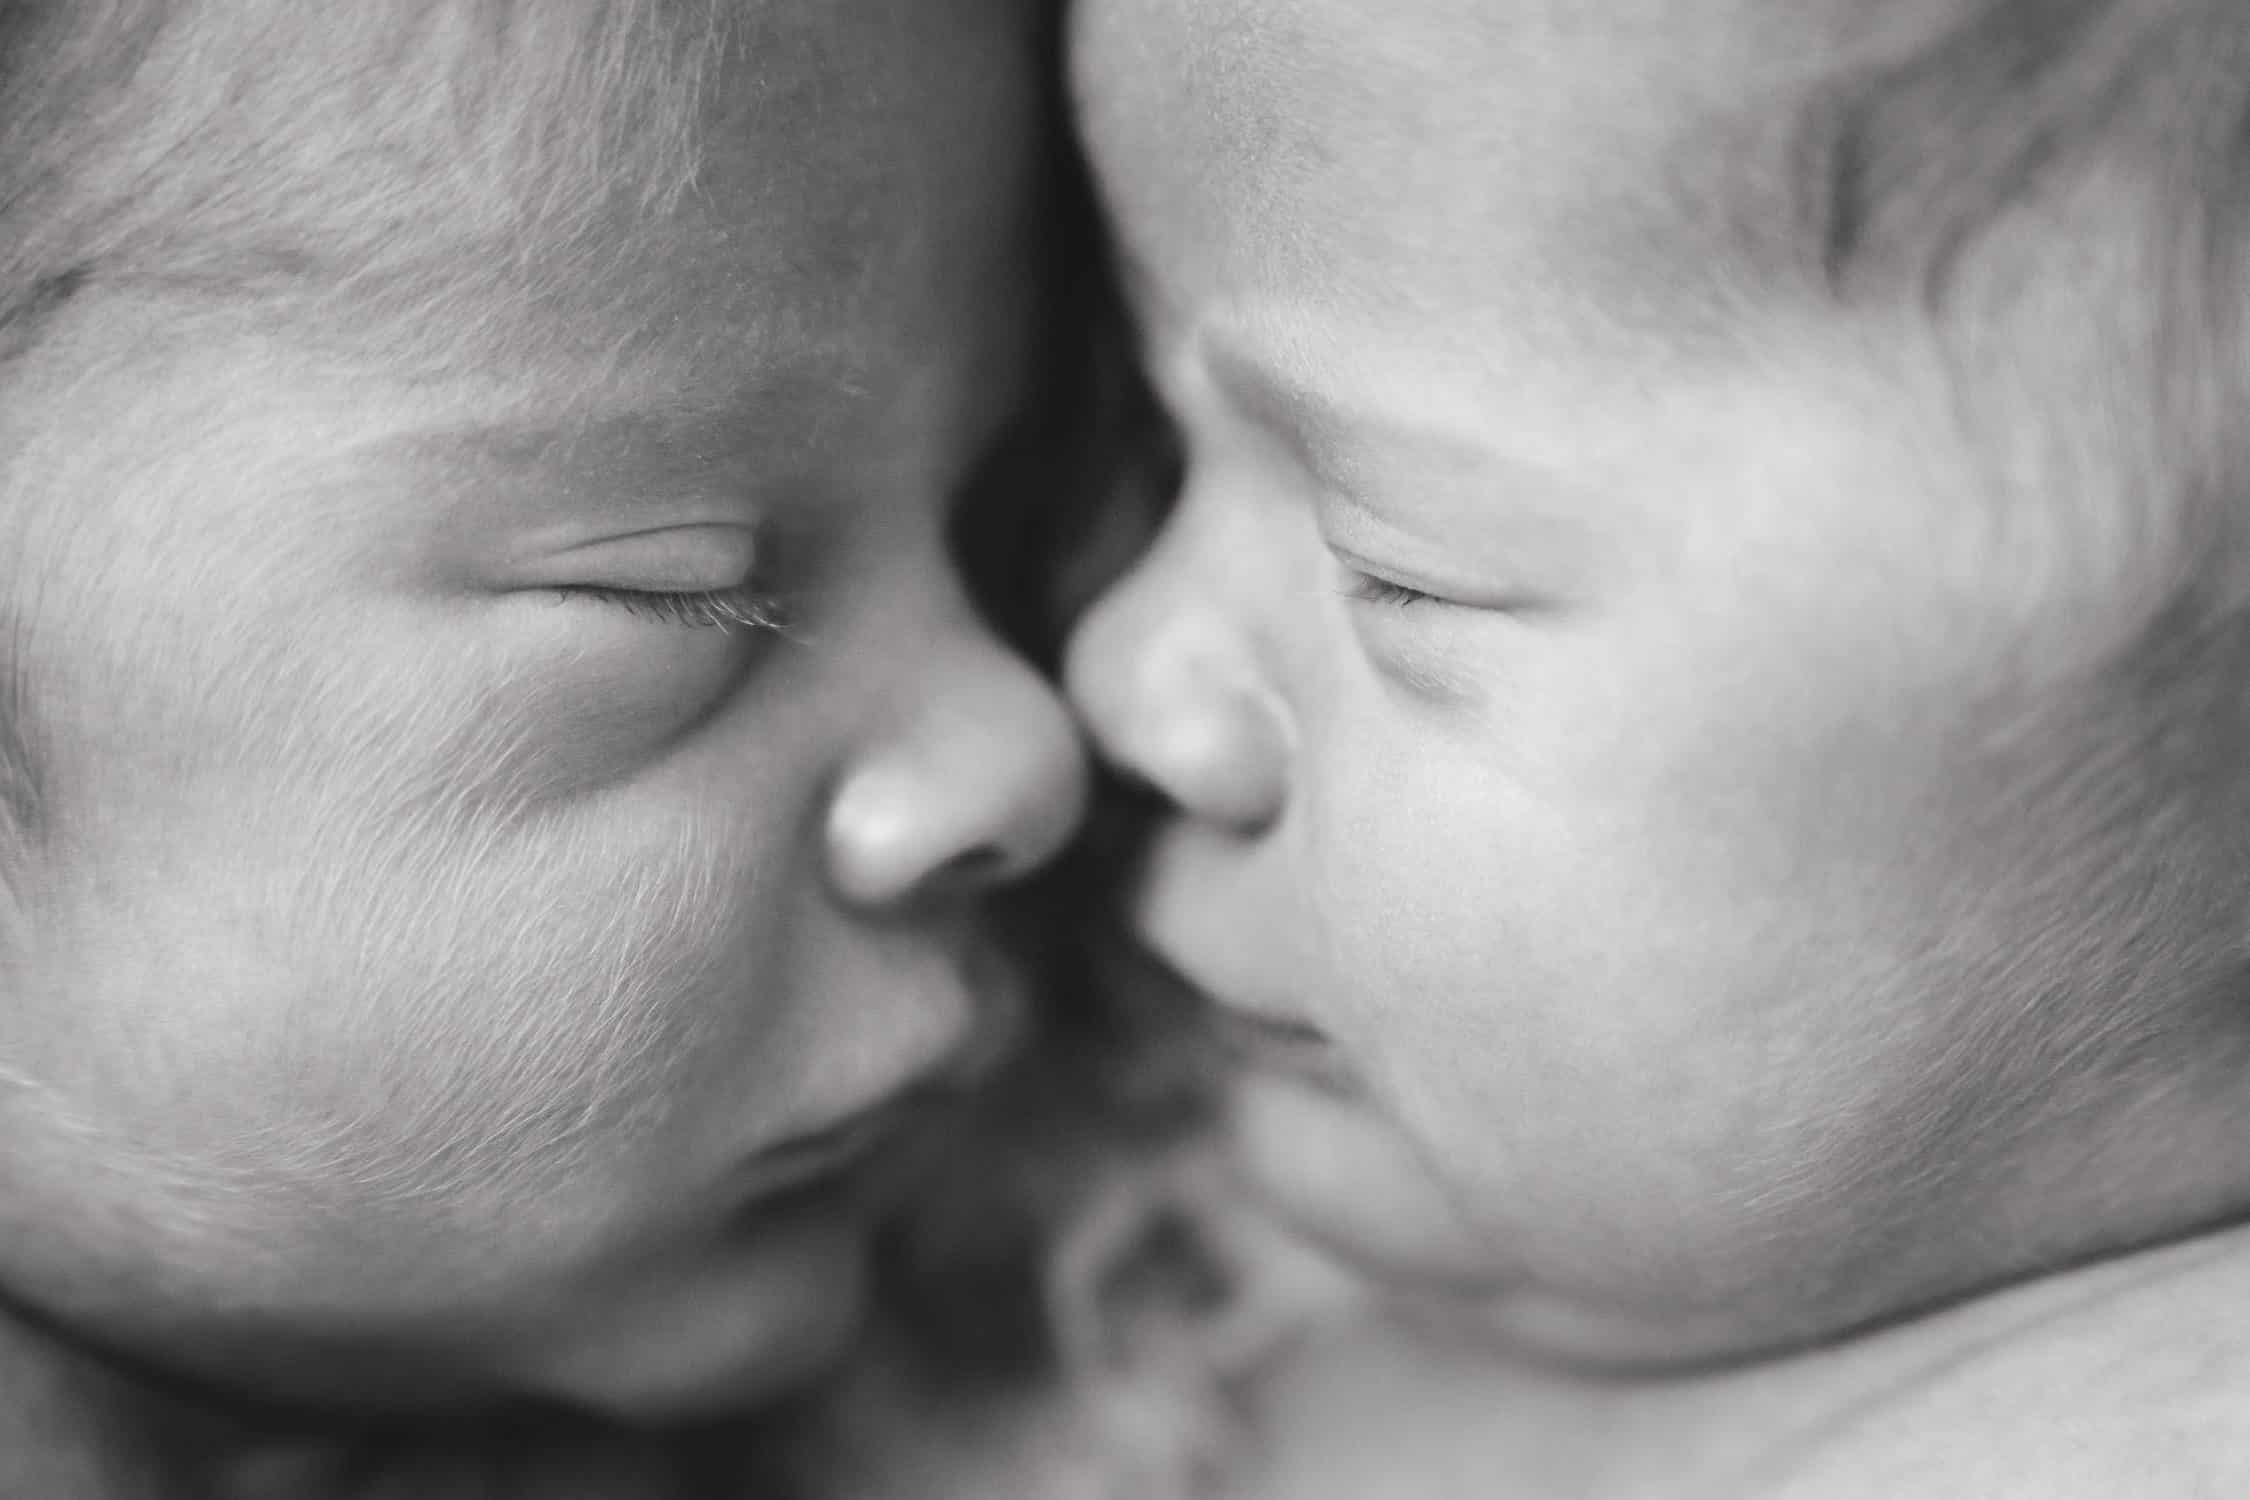 Kansas city twins showing the love of brother and sister outside the womb